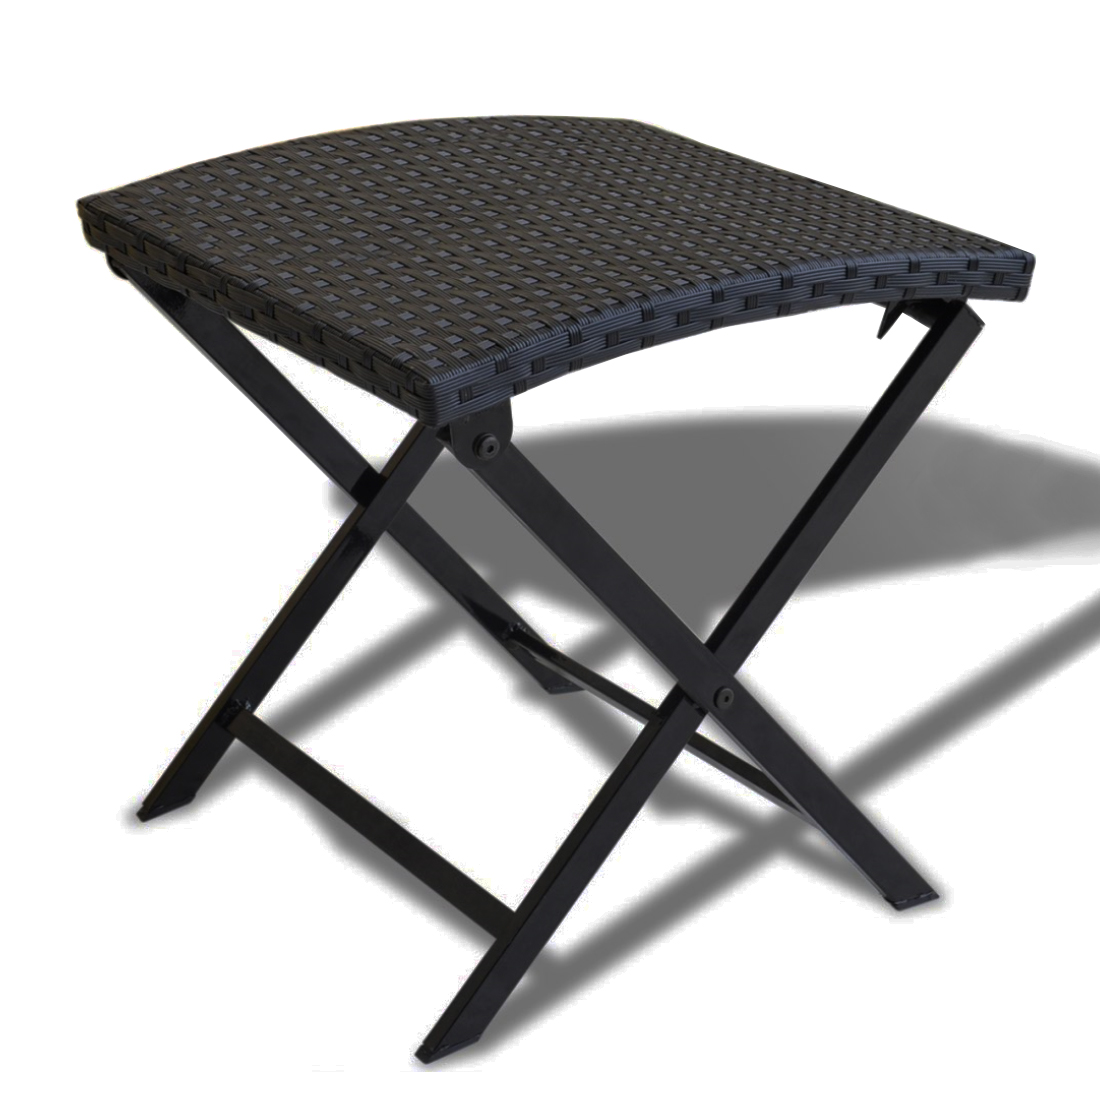 Oakland Living 51-stool-bk Indoor & Outdoor Patio Balcony Deck Kitchen Wicker Foldable Black Chair Stool With Metal Frame